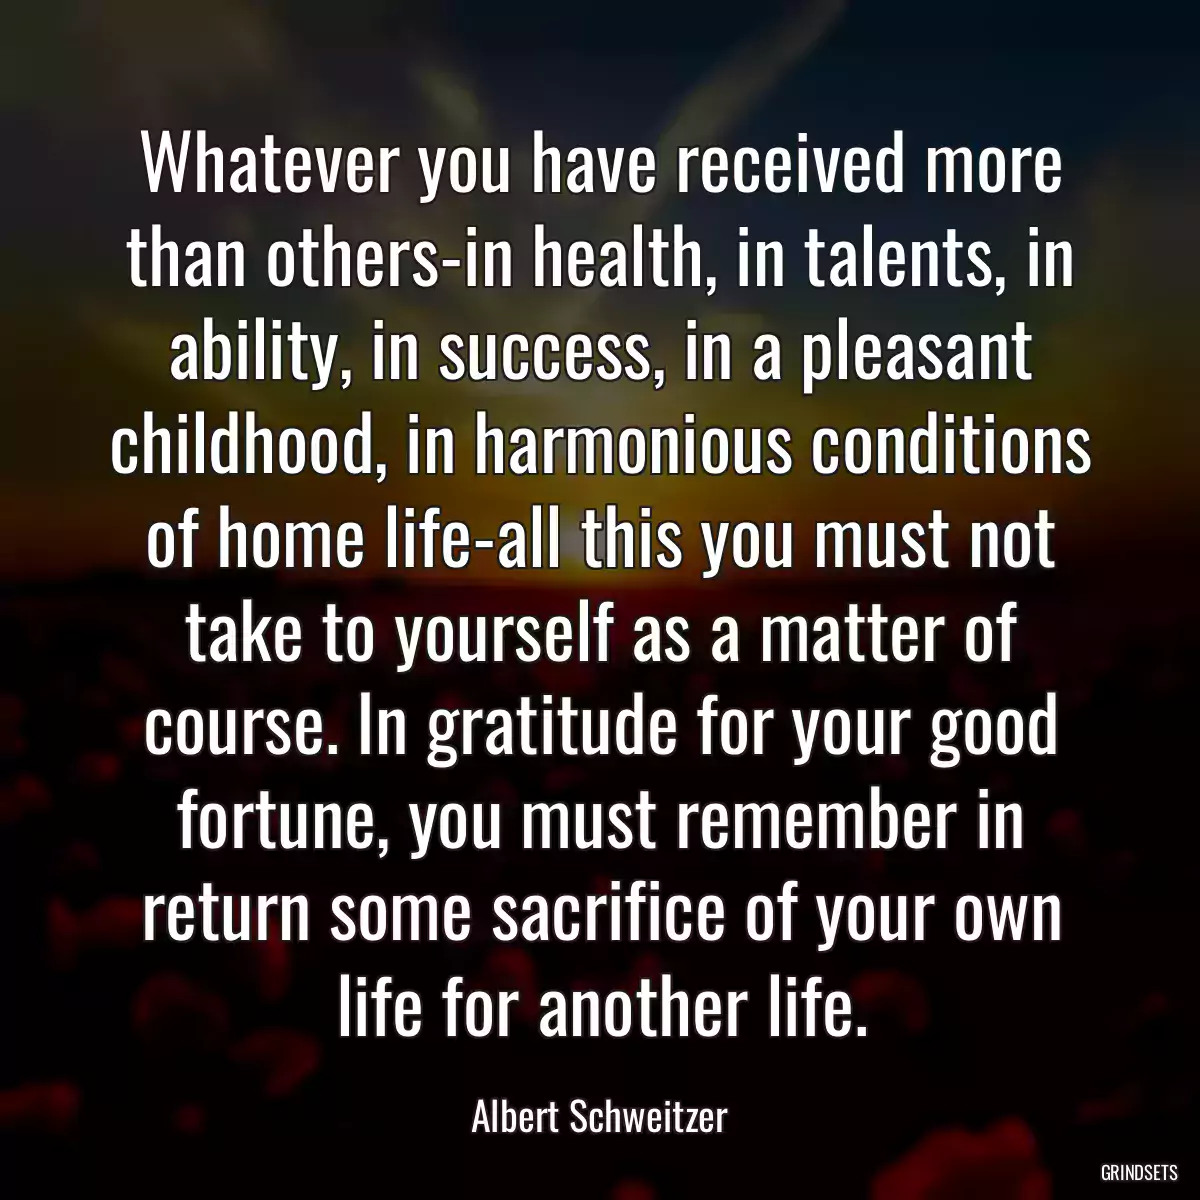 Whatever you have received more than others-in health, in talents, in ability, in success, in a pleasant childhood, in harmonious conditions of home life-all this you must not take to yourself as a matter of course. In gratitude for your good fortune, you must remember in return some sacrifice of your own life for another life.